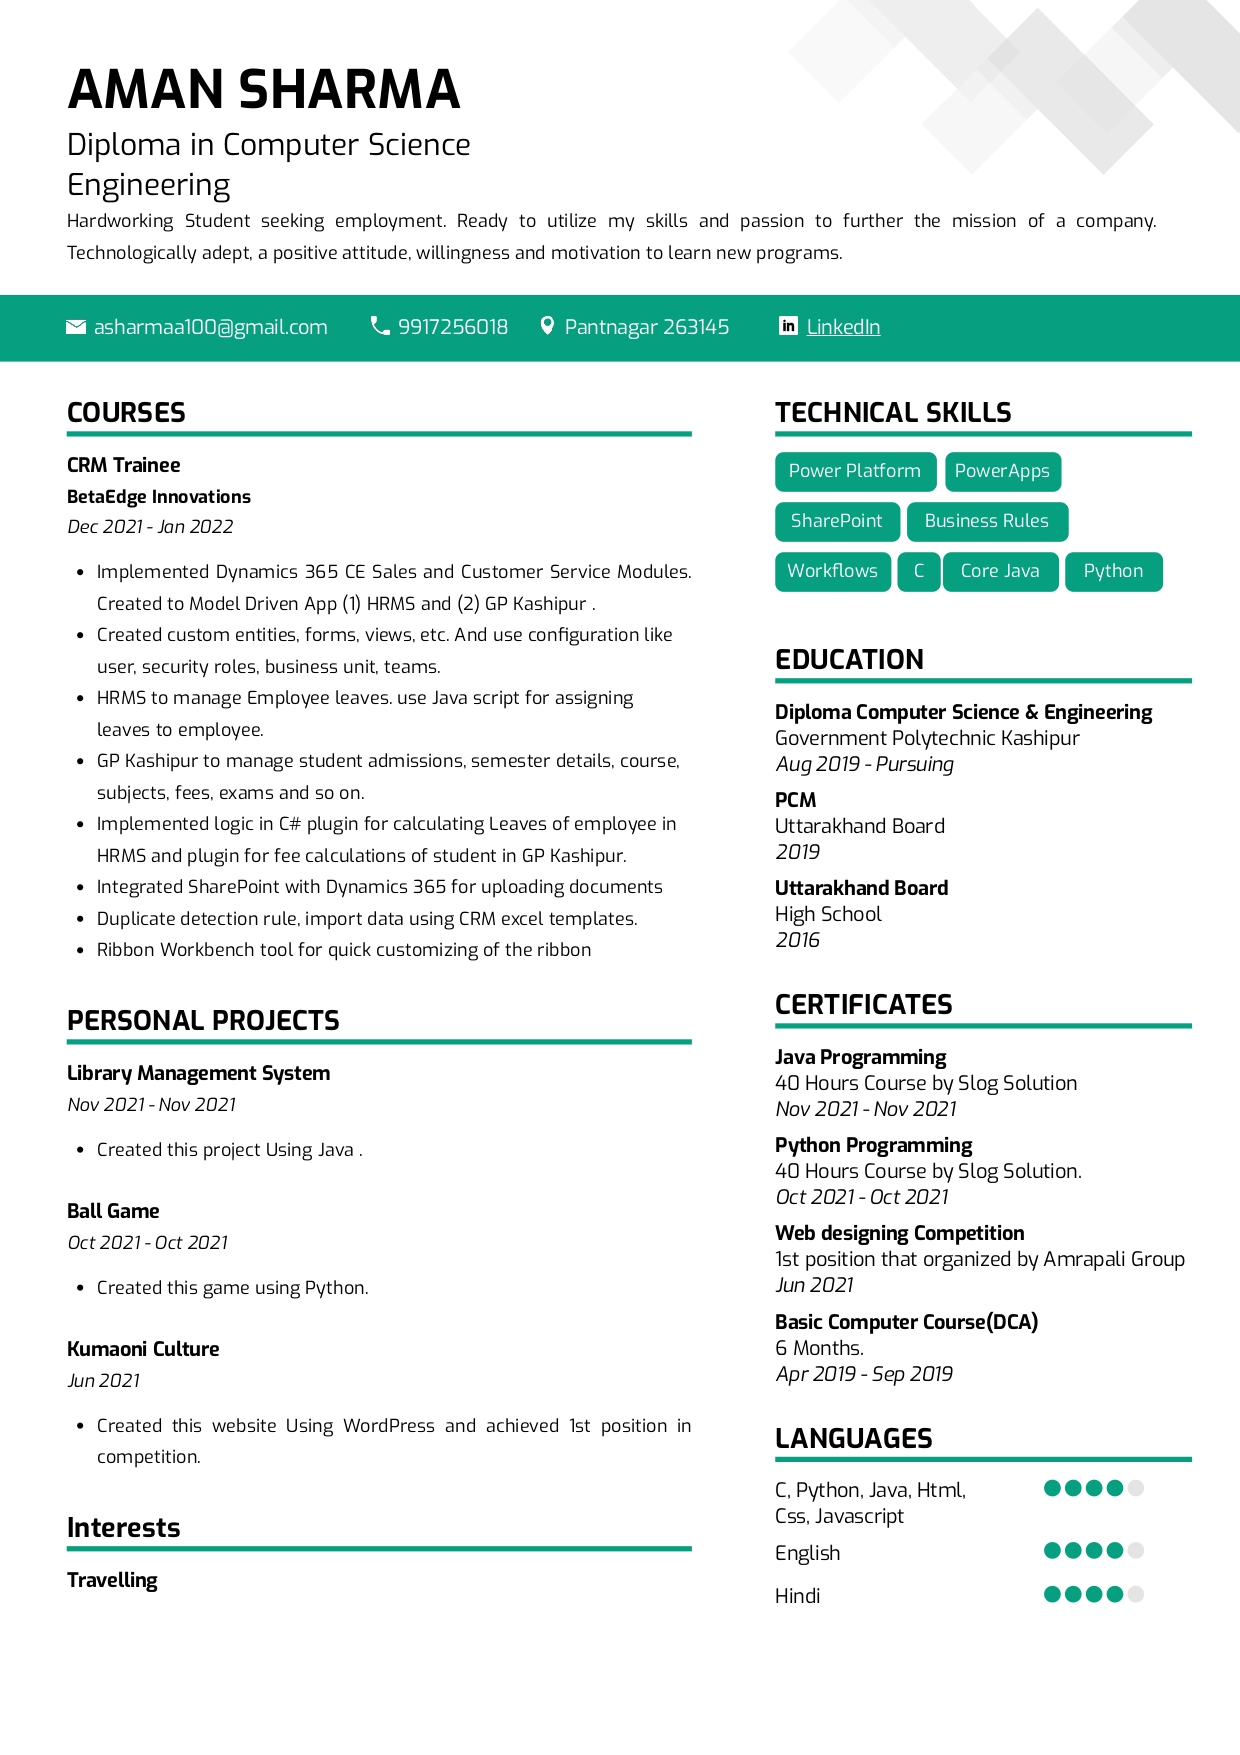 Resume of a Computer Science Engineer